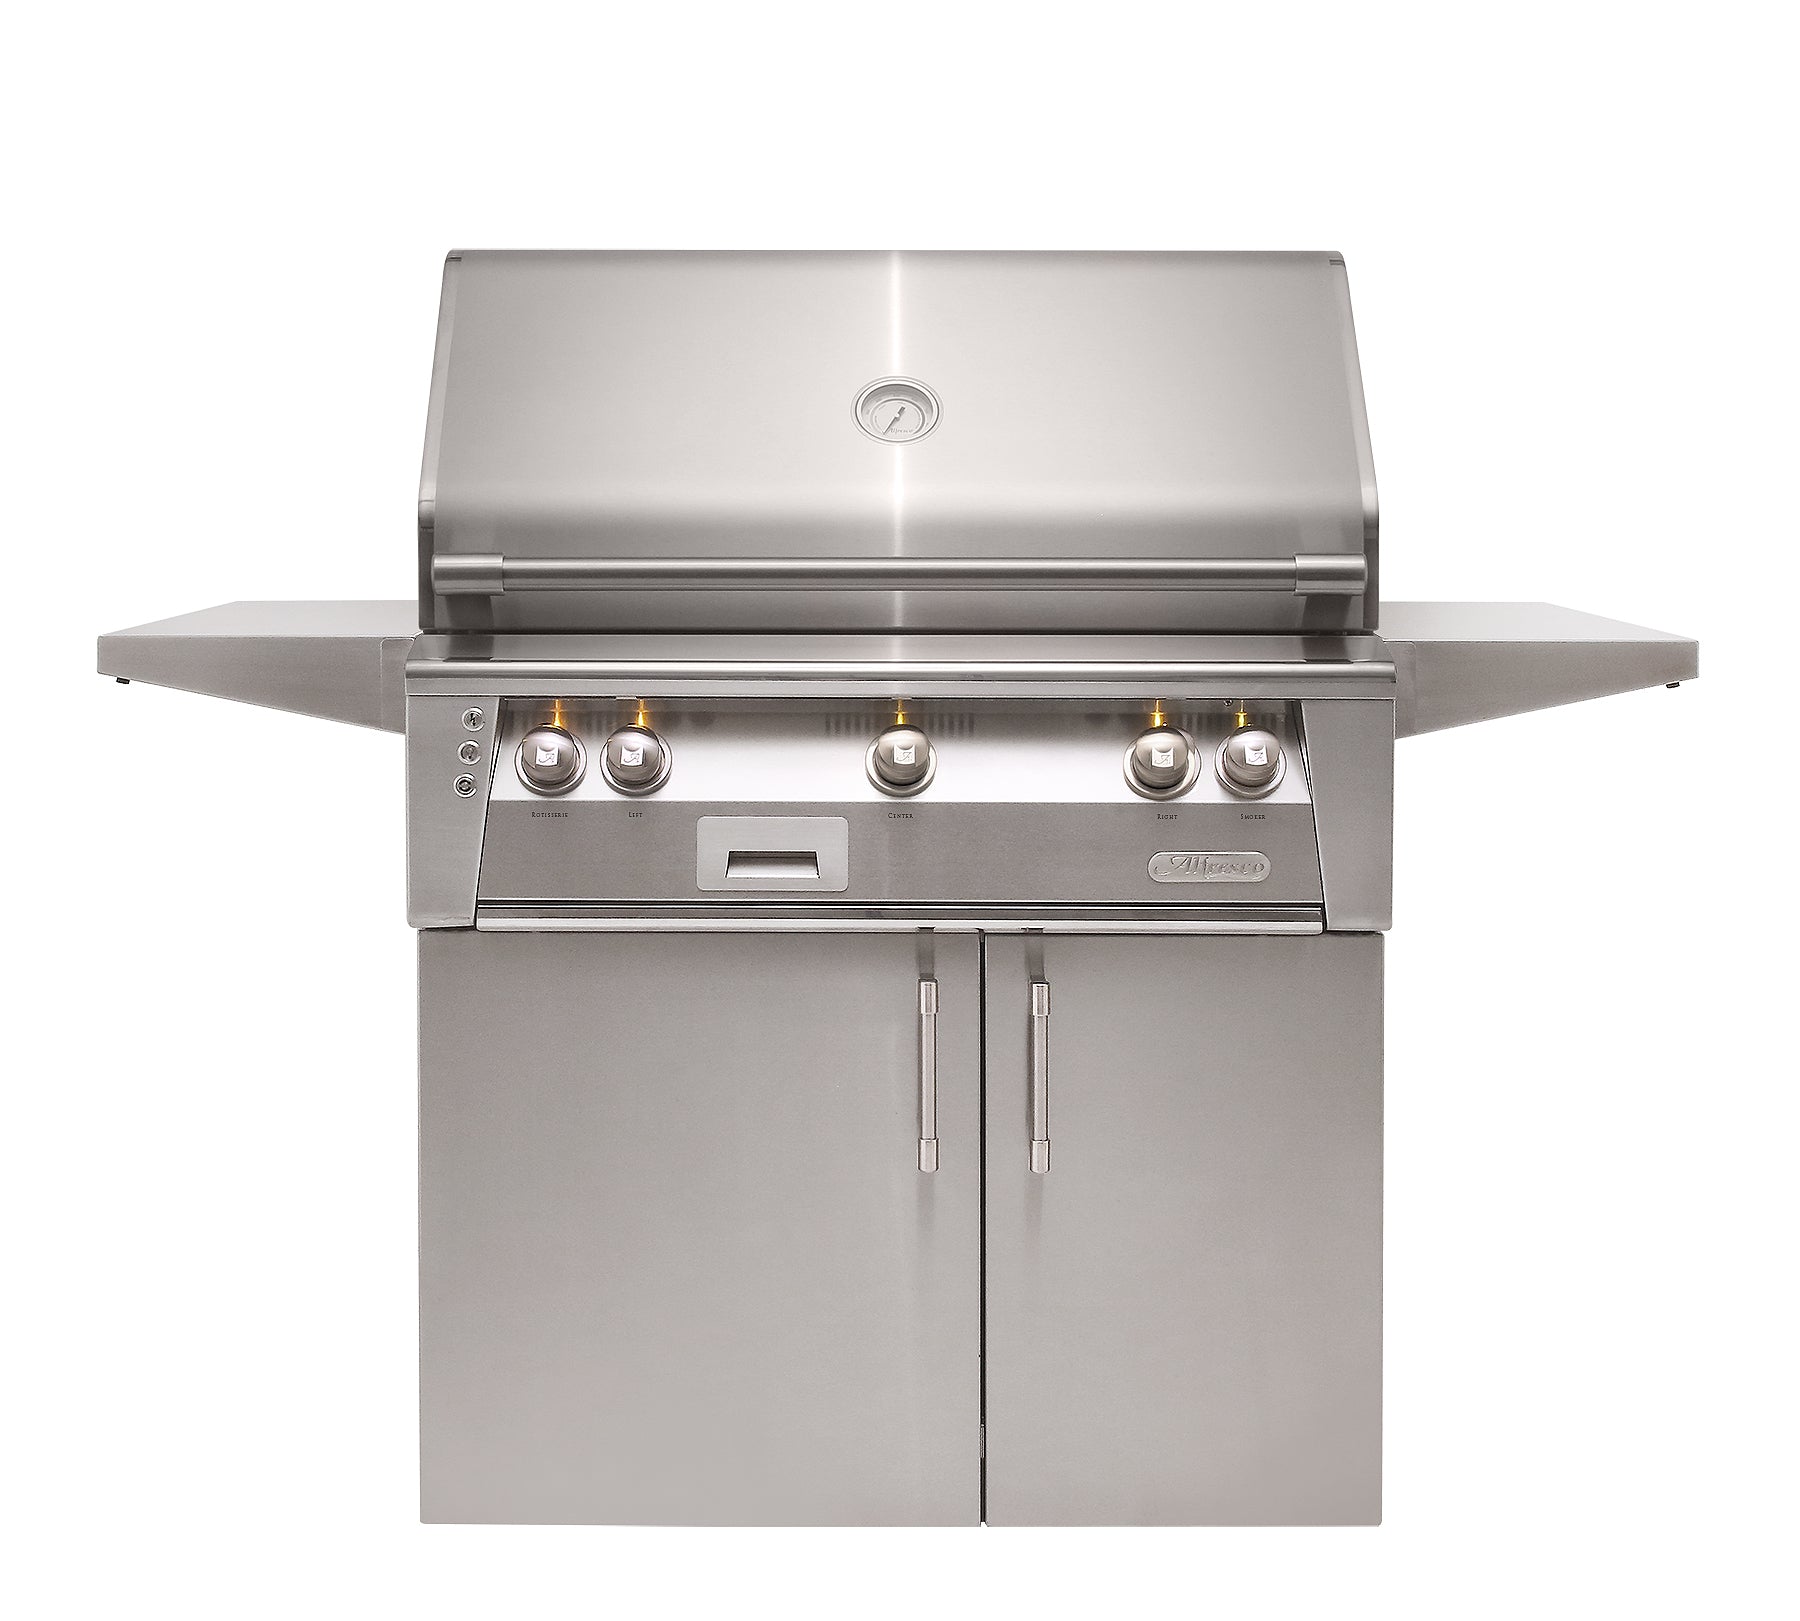 Alfresco - 3 Burner Natural Gas BBQ in Stainless - ALXE-36C